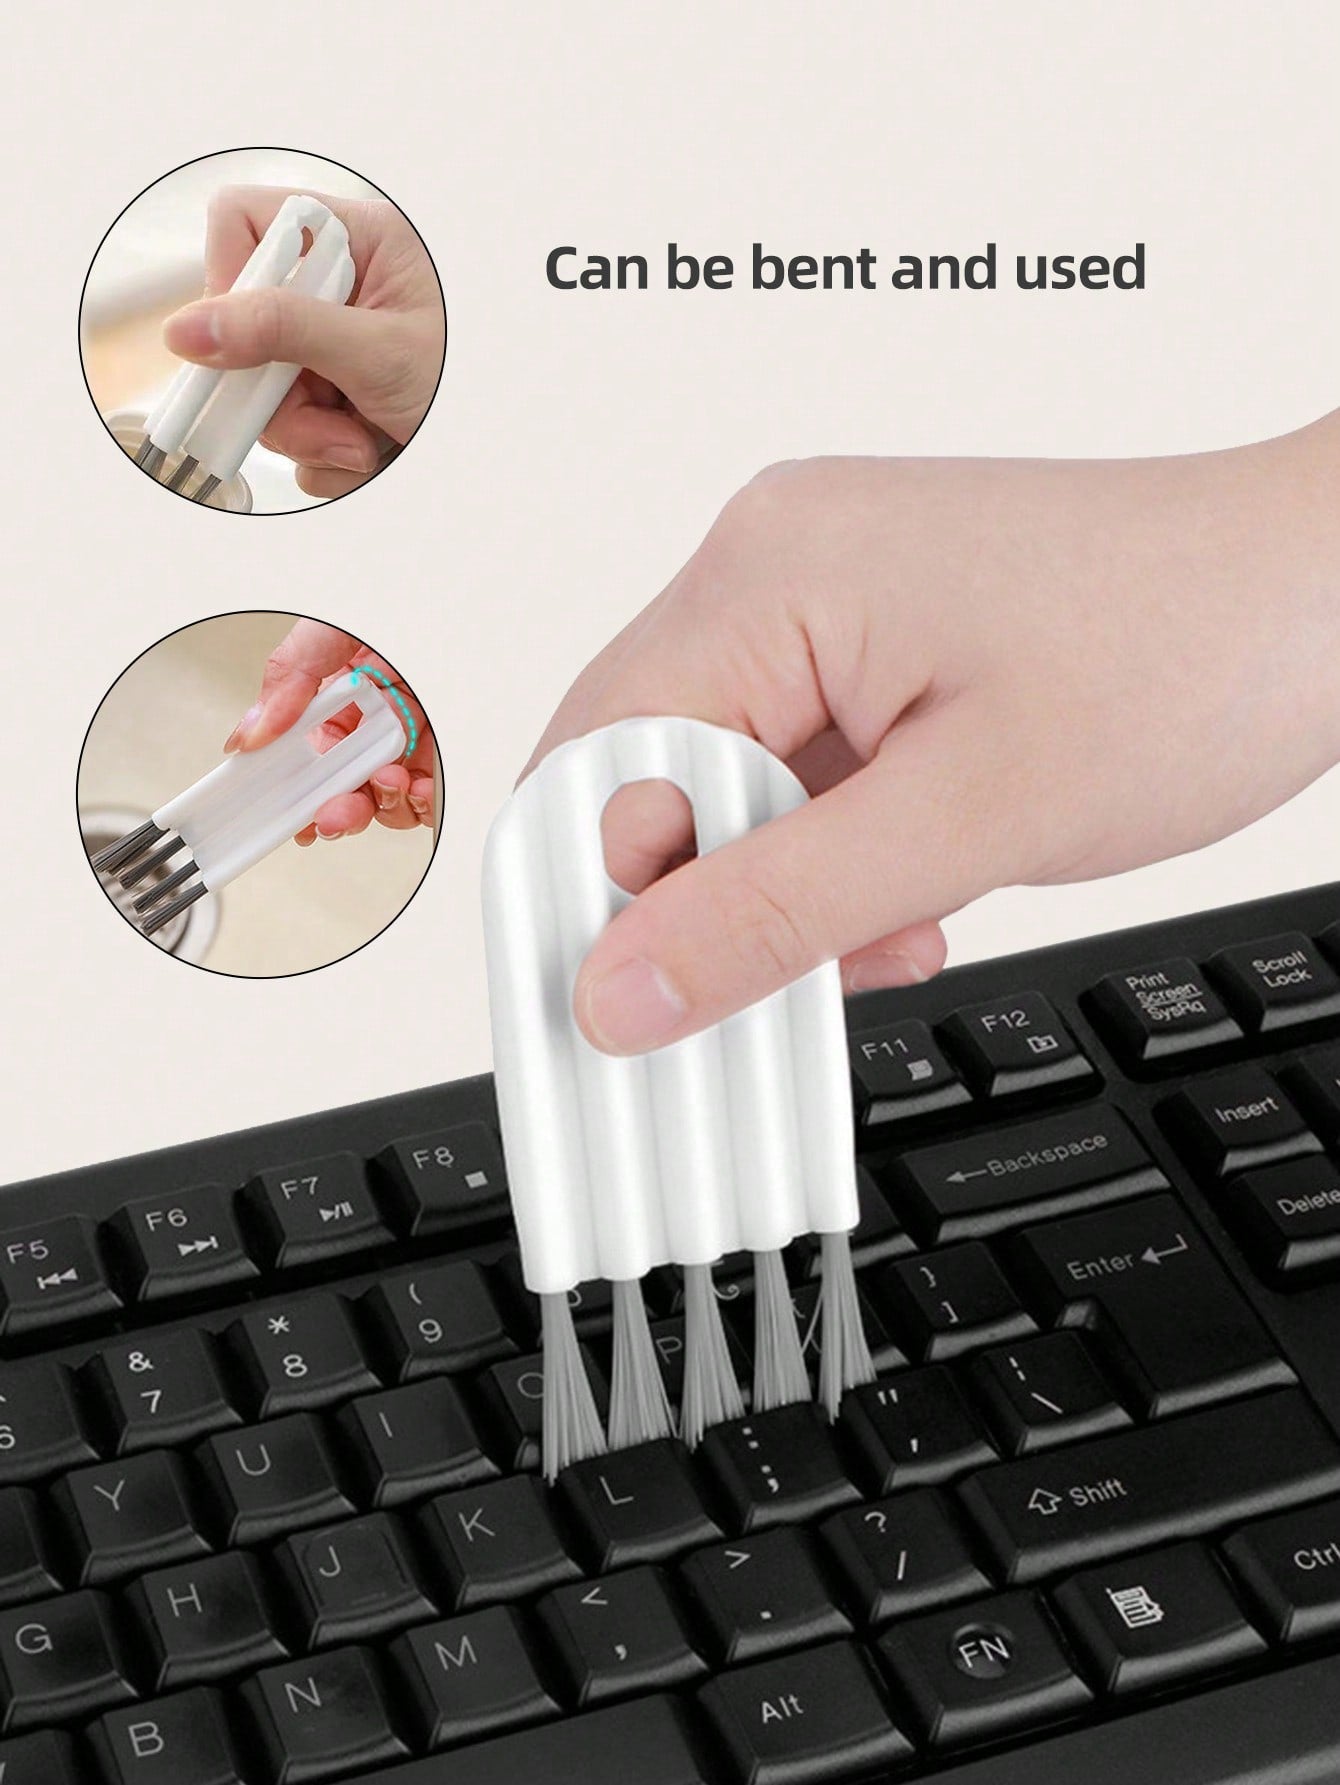 Computer Keyboard Cleaning Brush Precision Cleaning